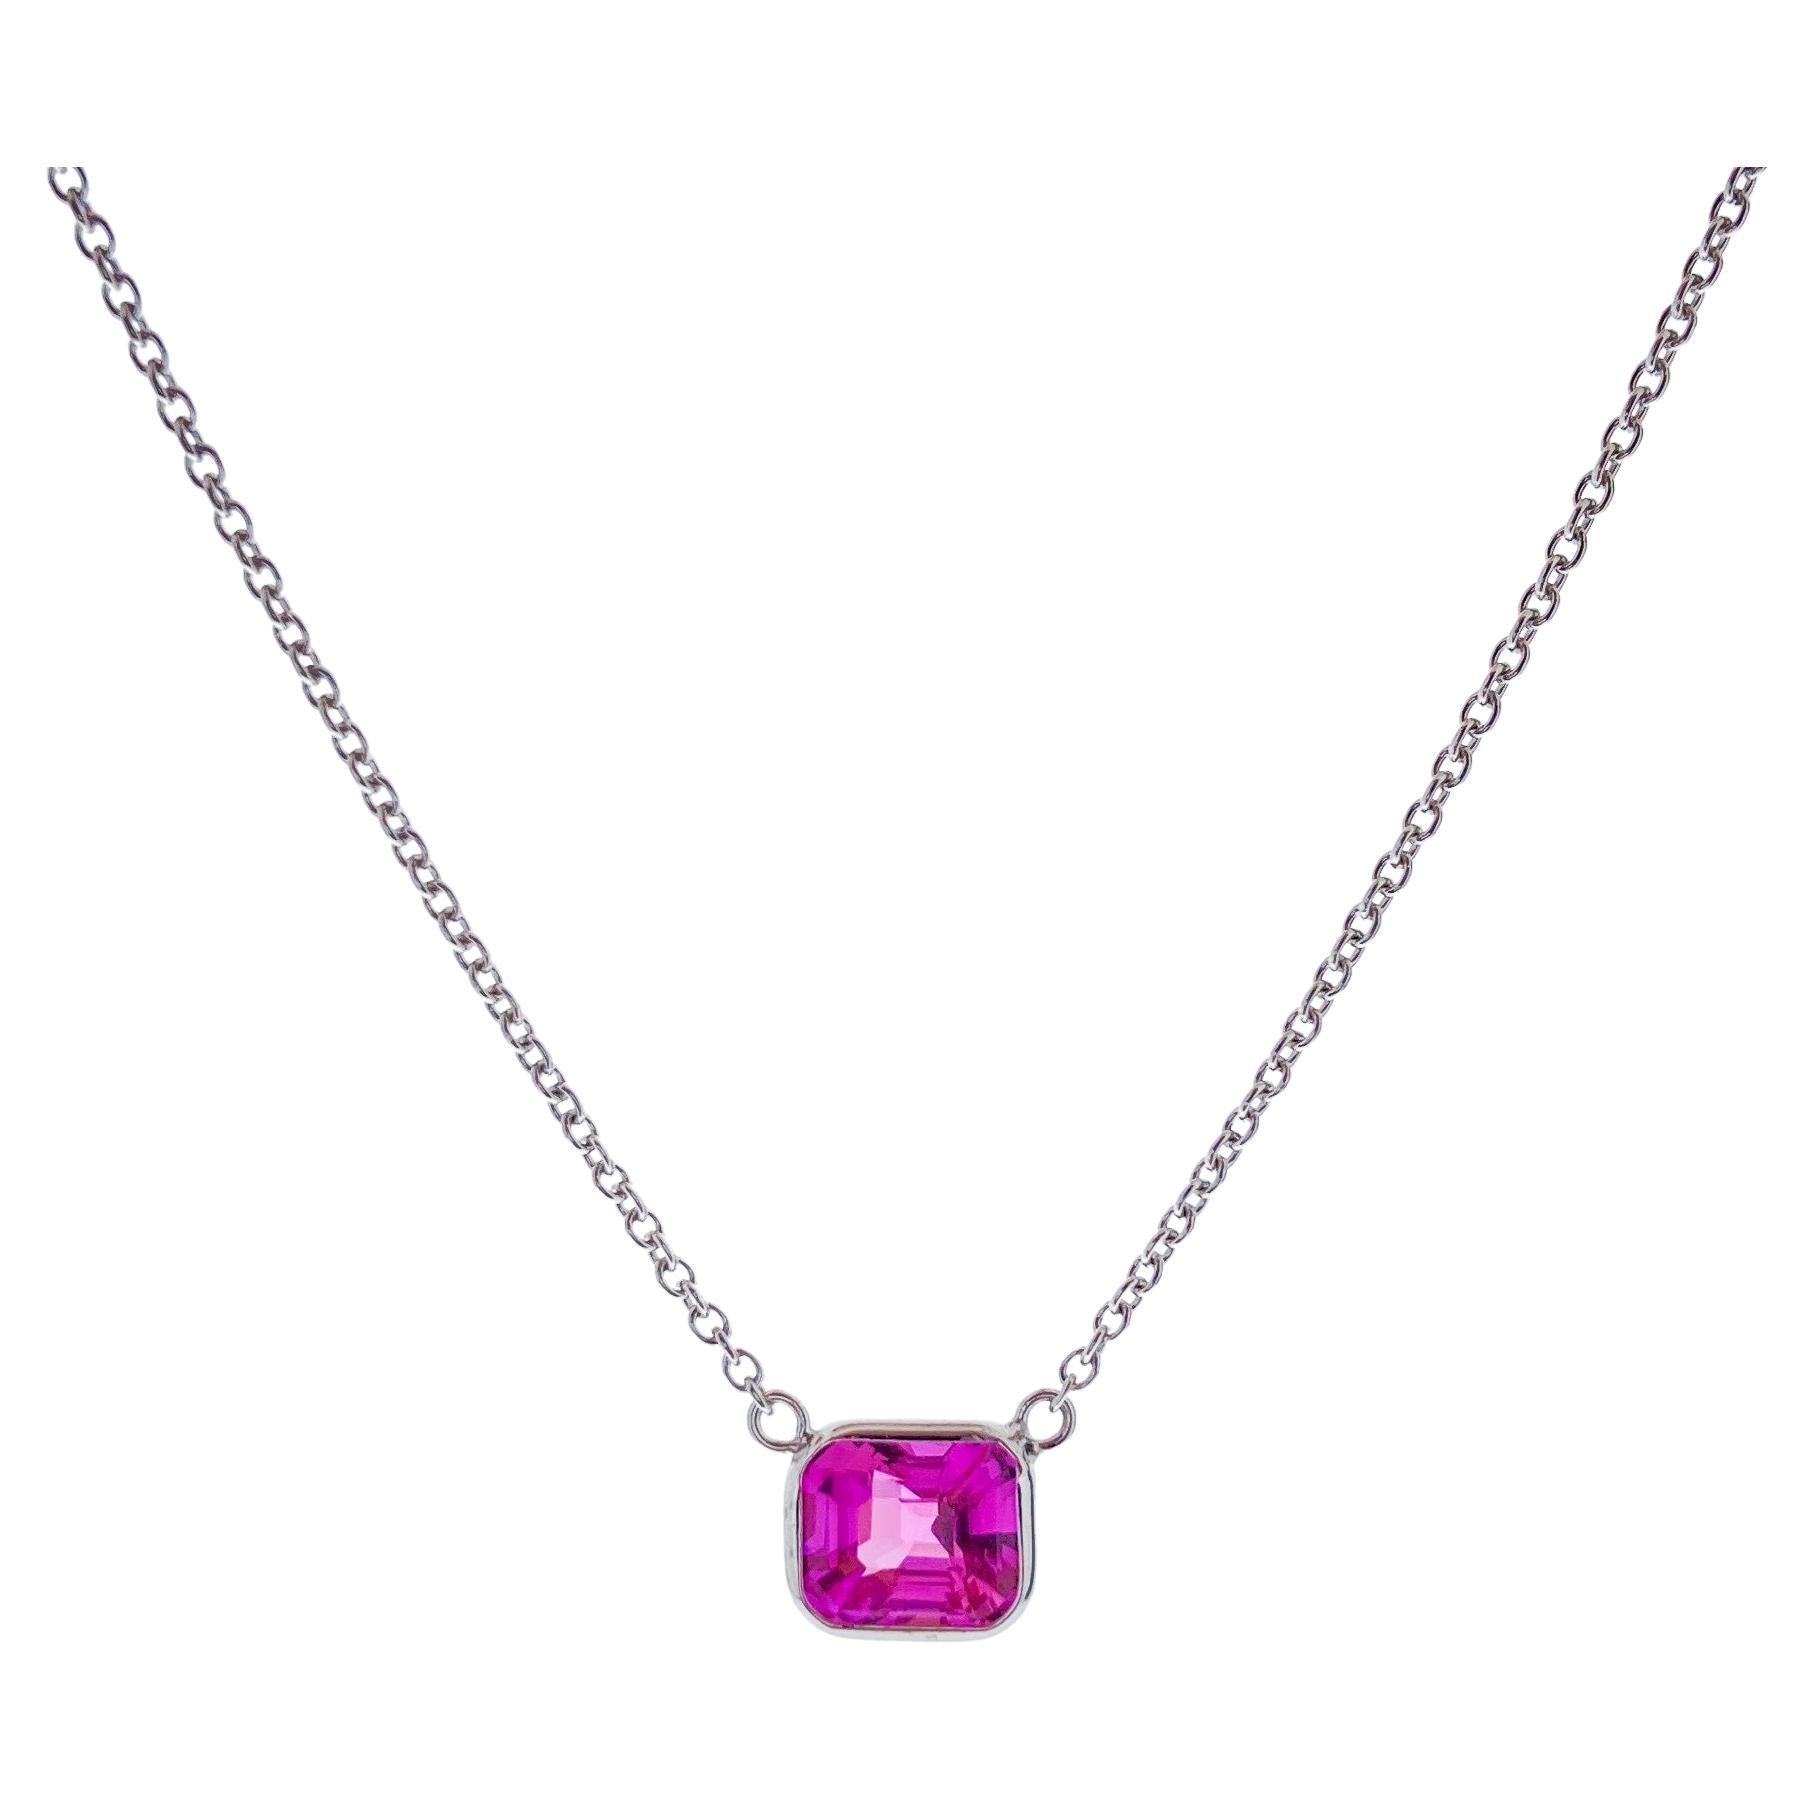 1.60 Carat Emerald Cut Pink Sapphire Fashion Necklaces In 14K White Gold  